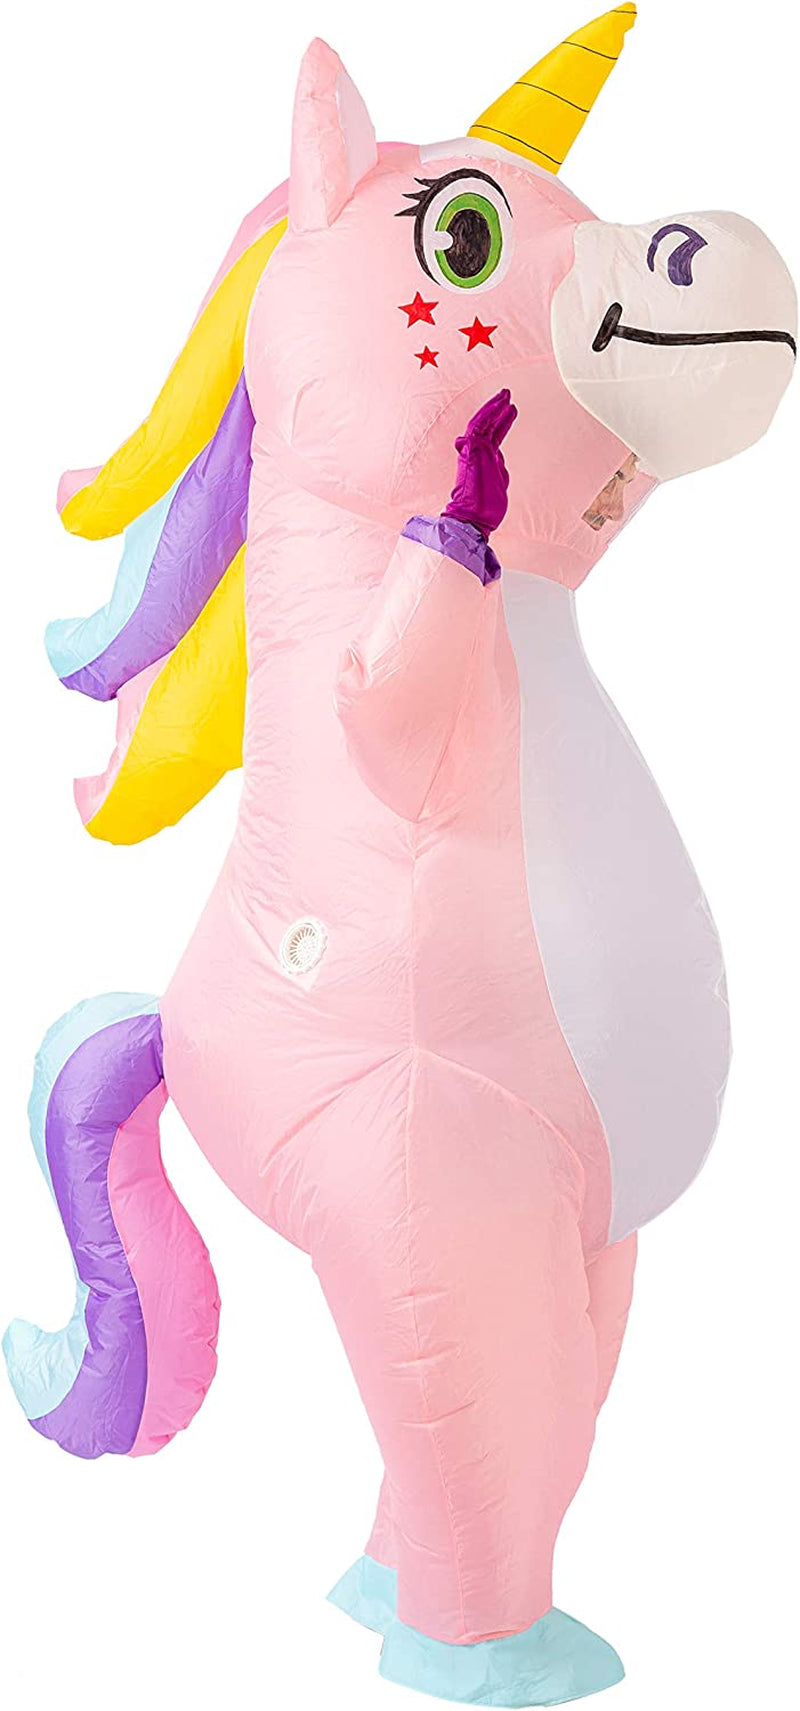 Spooktacular Creations Inflatable Costume Full Body Unicorn Air Blow-Up Deluxe Halloween Costume - Adult Size  Spooktacular Creations   